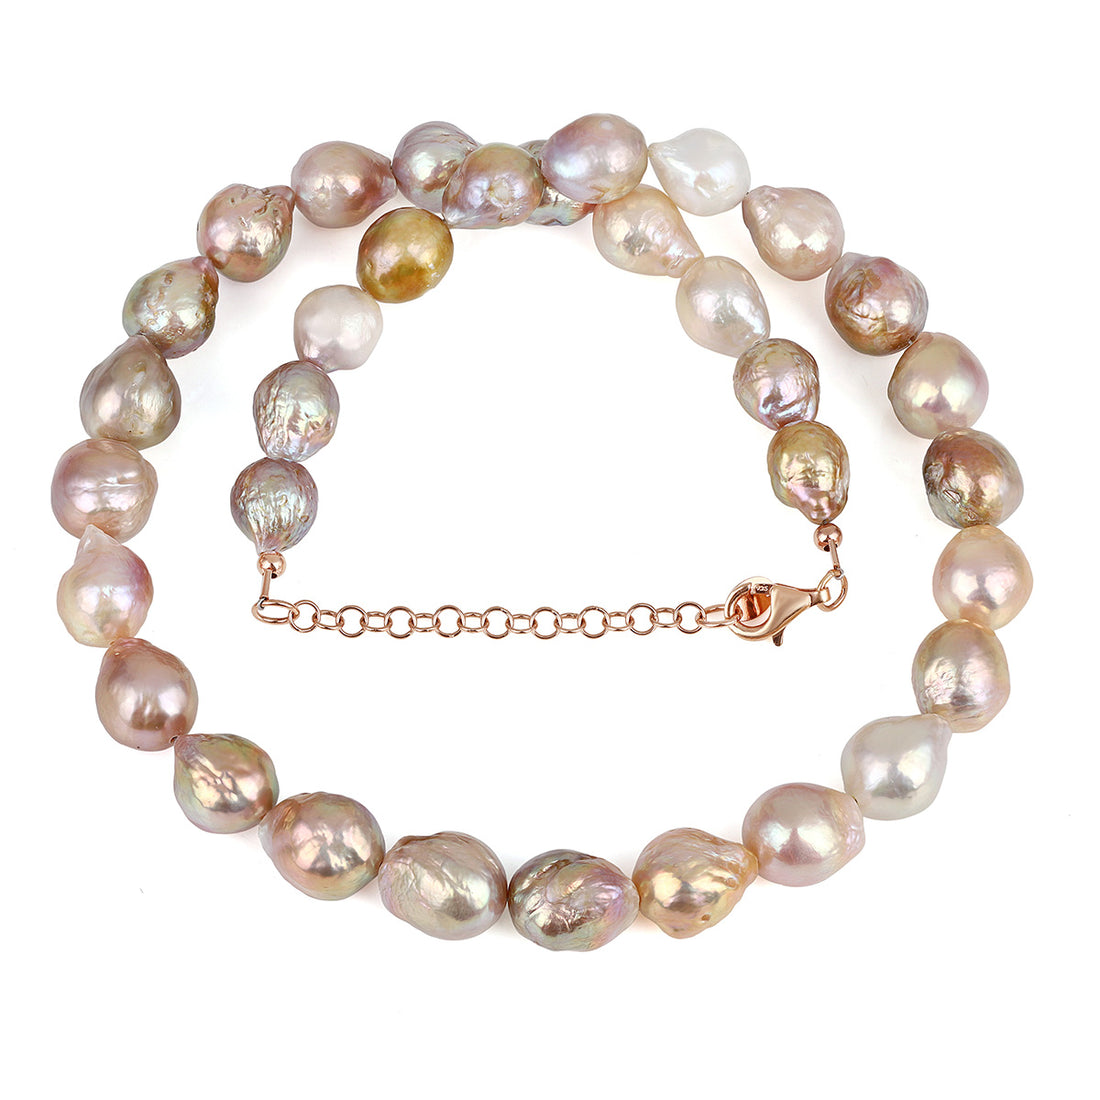 Mystic Pearl Beads Silver Necklace